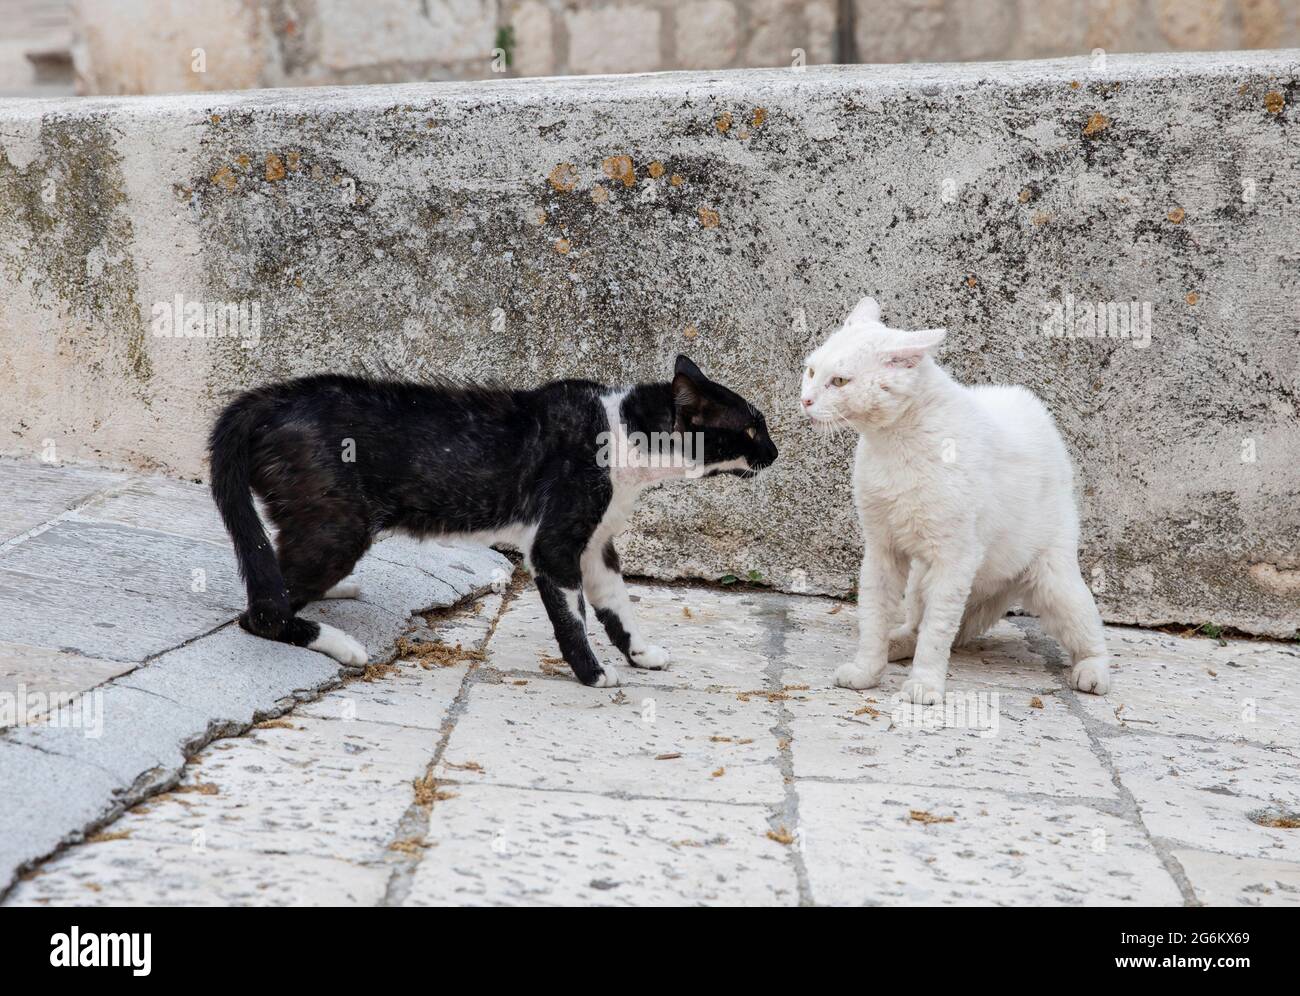 Cats arguing on the street Stock Photo